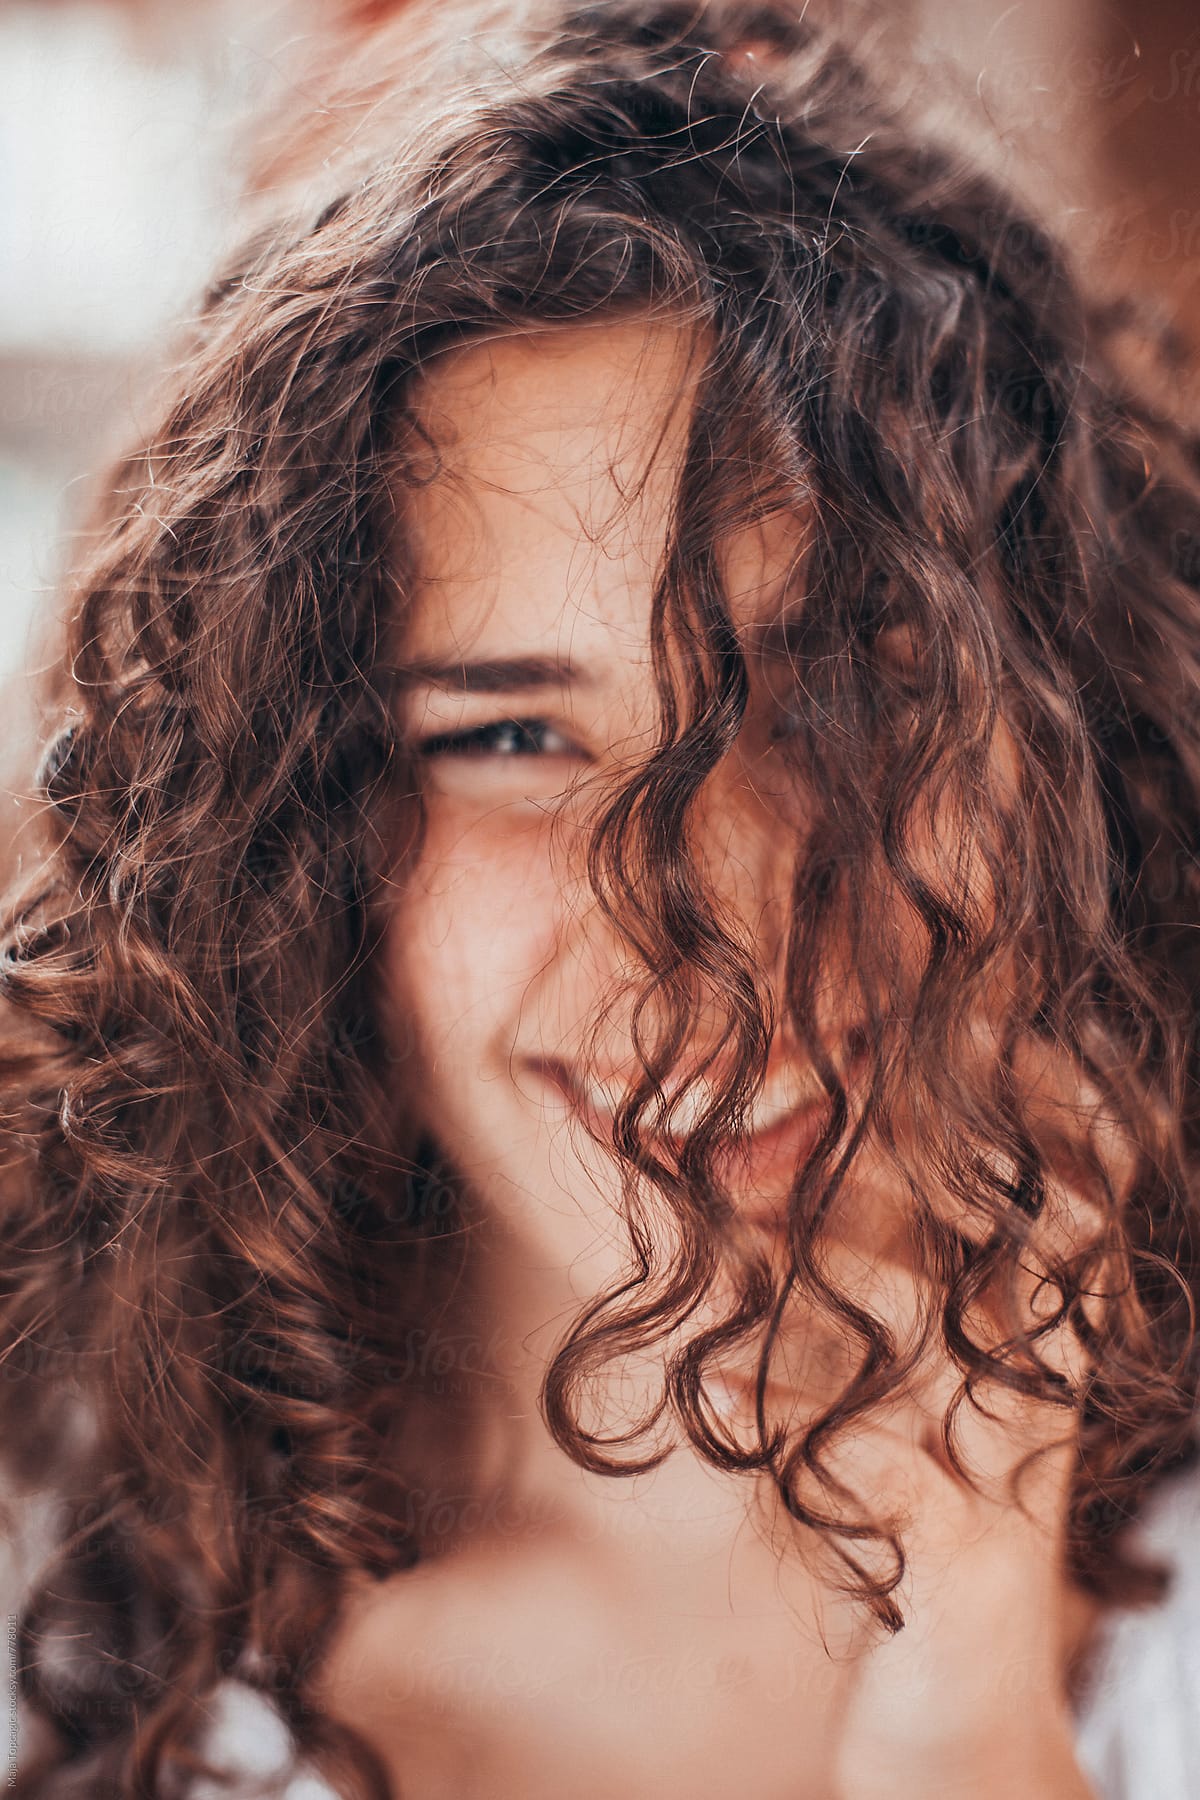 Beautiful Young Woman With Curly Hair Blue Eyes And Freckles Del